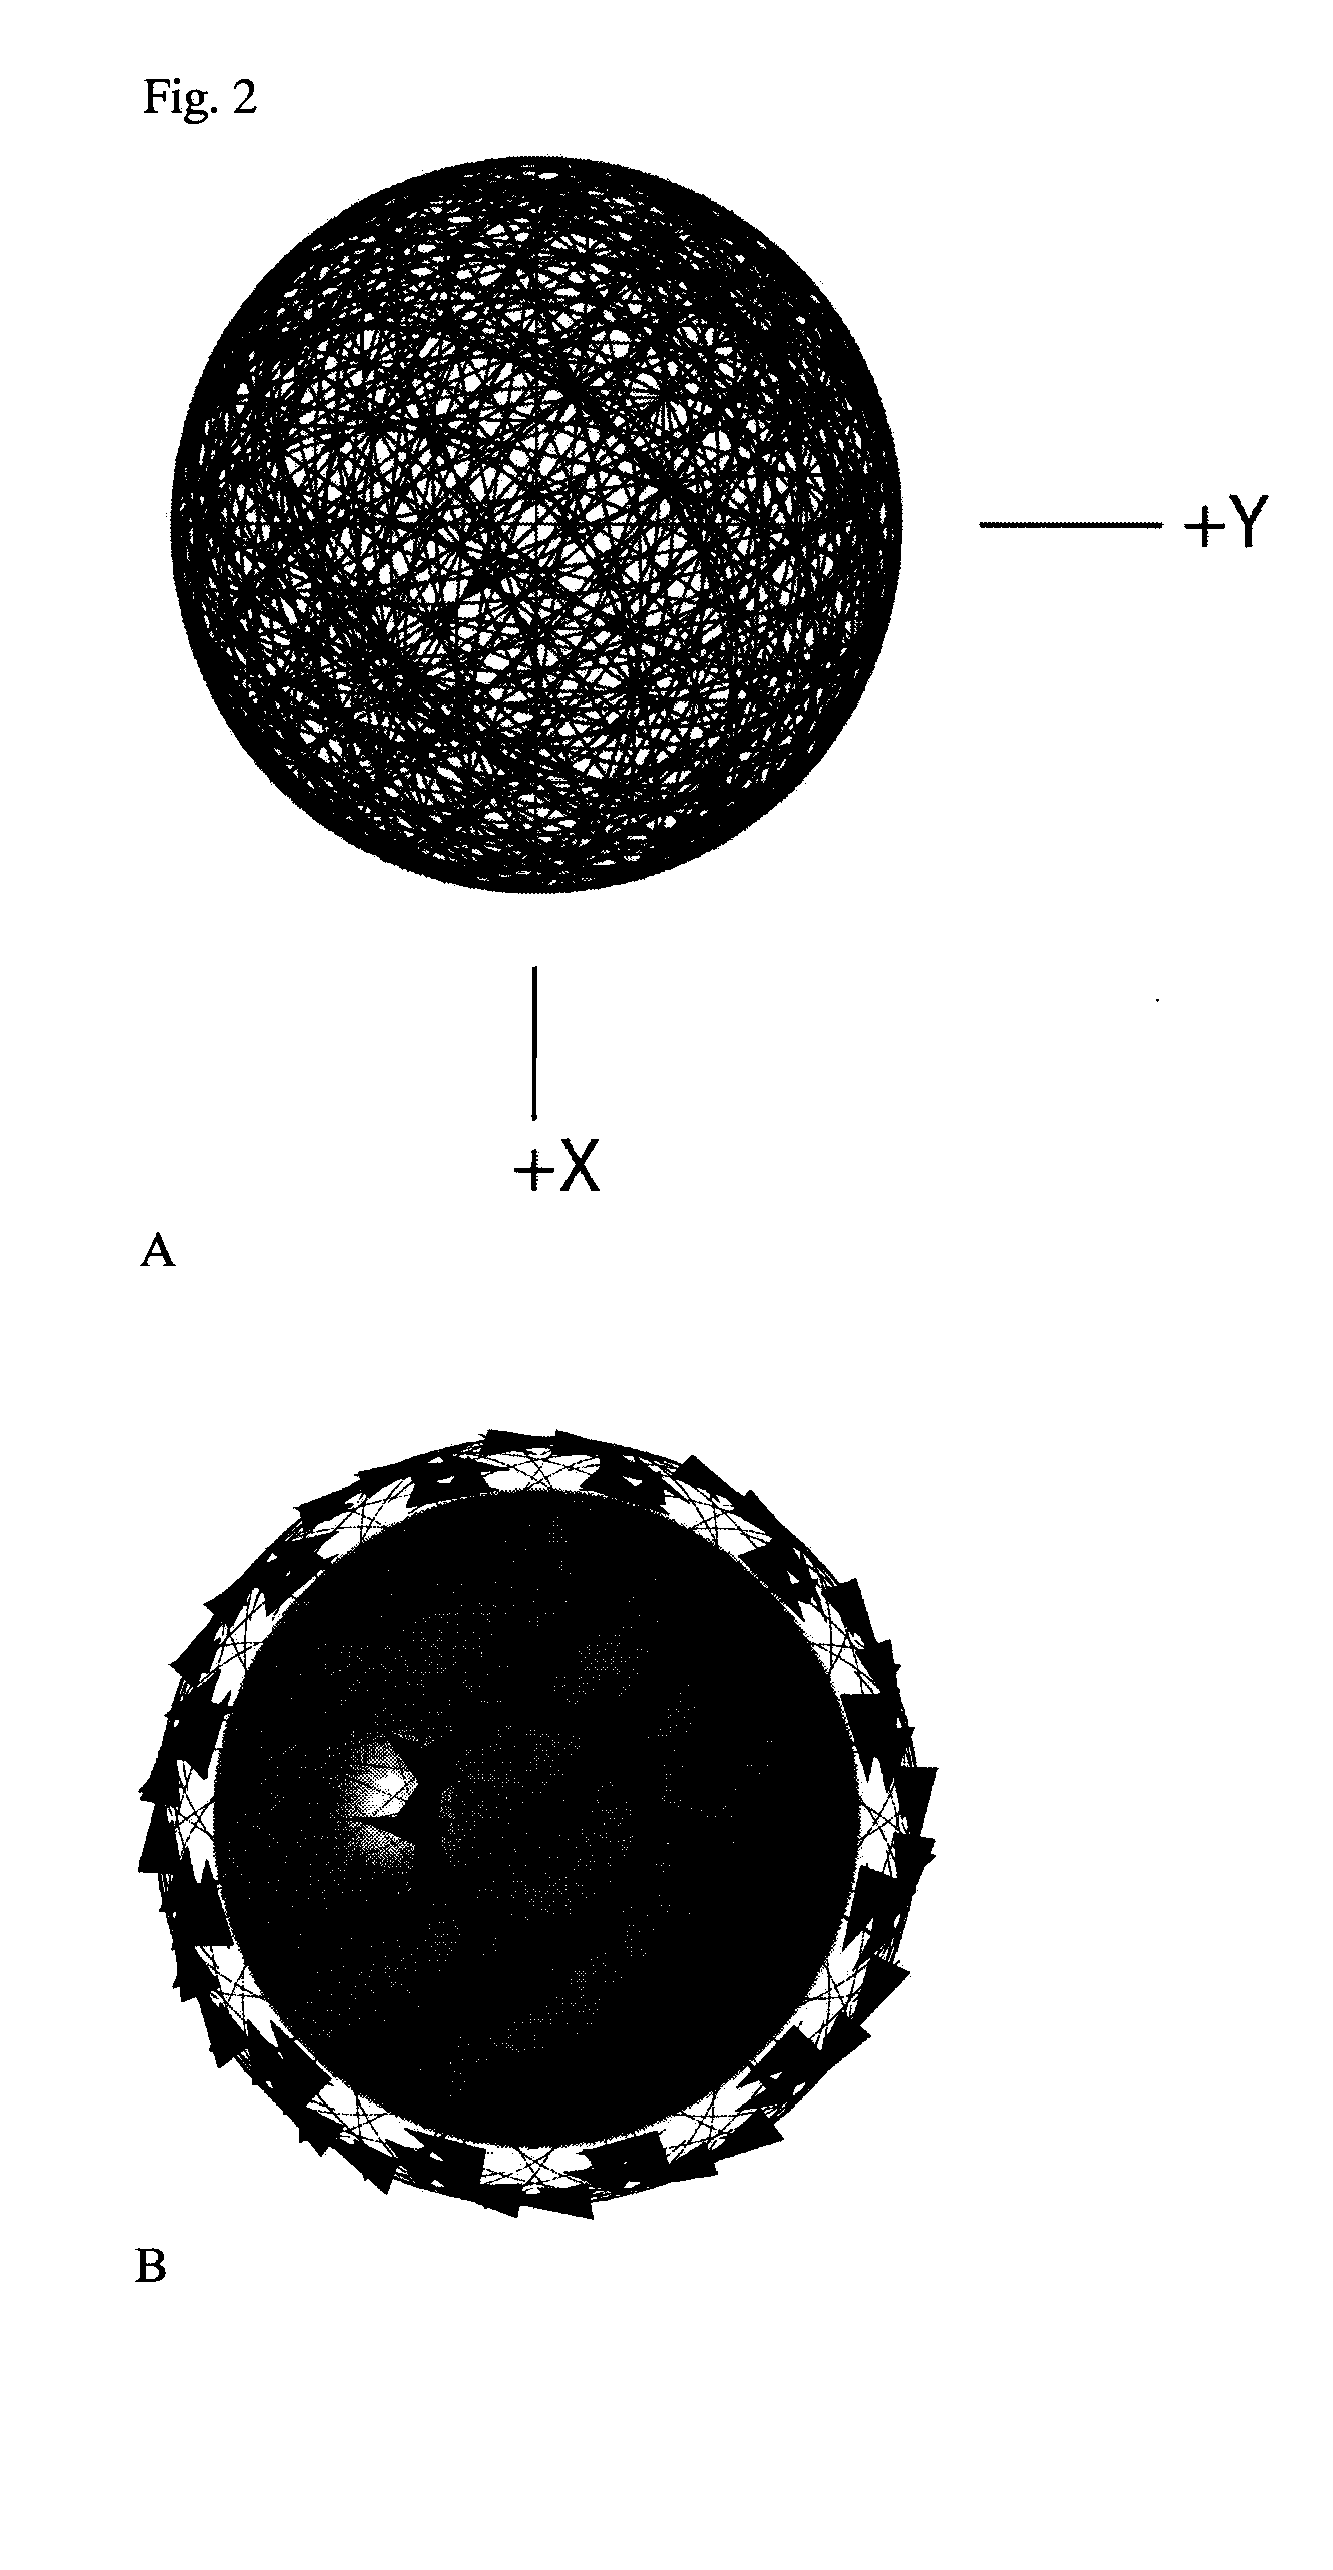 System and Method of Computing and Rendering the Nature of Dipole Moments, Condensed Matter, and Reaction Kinetics